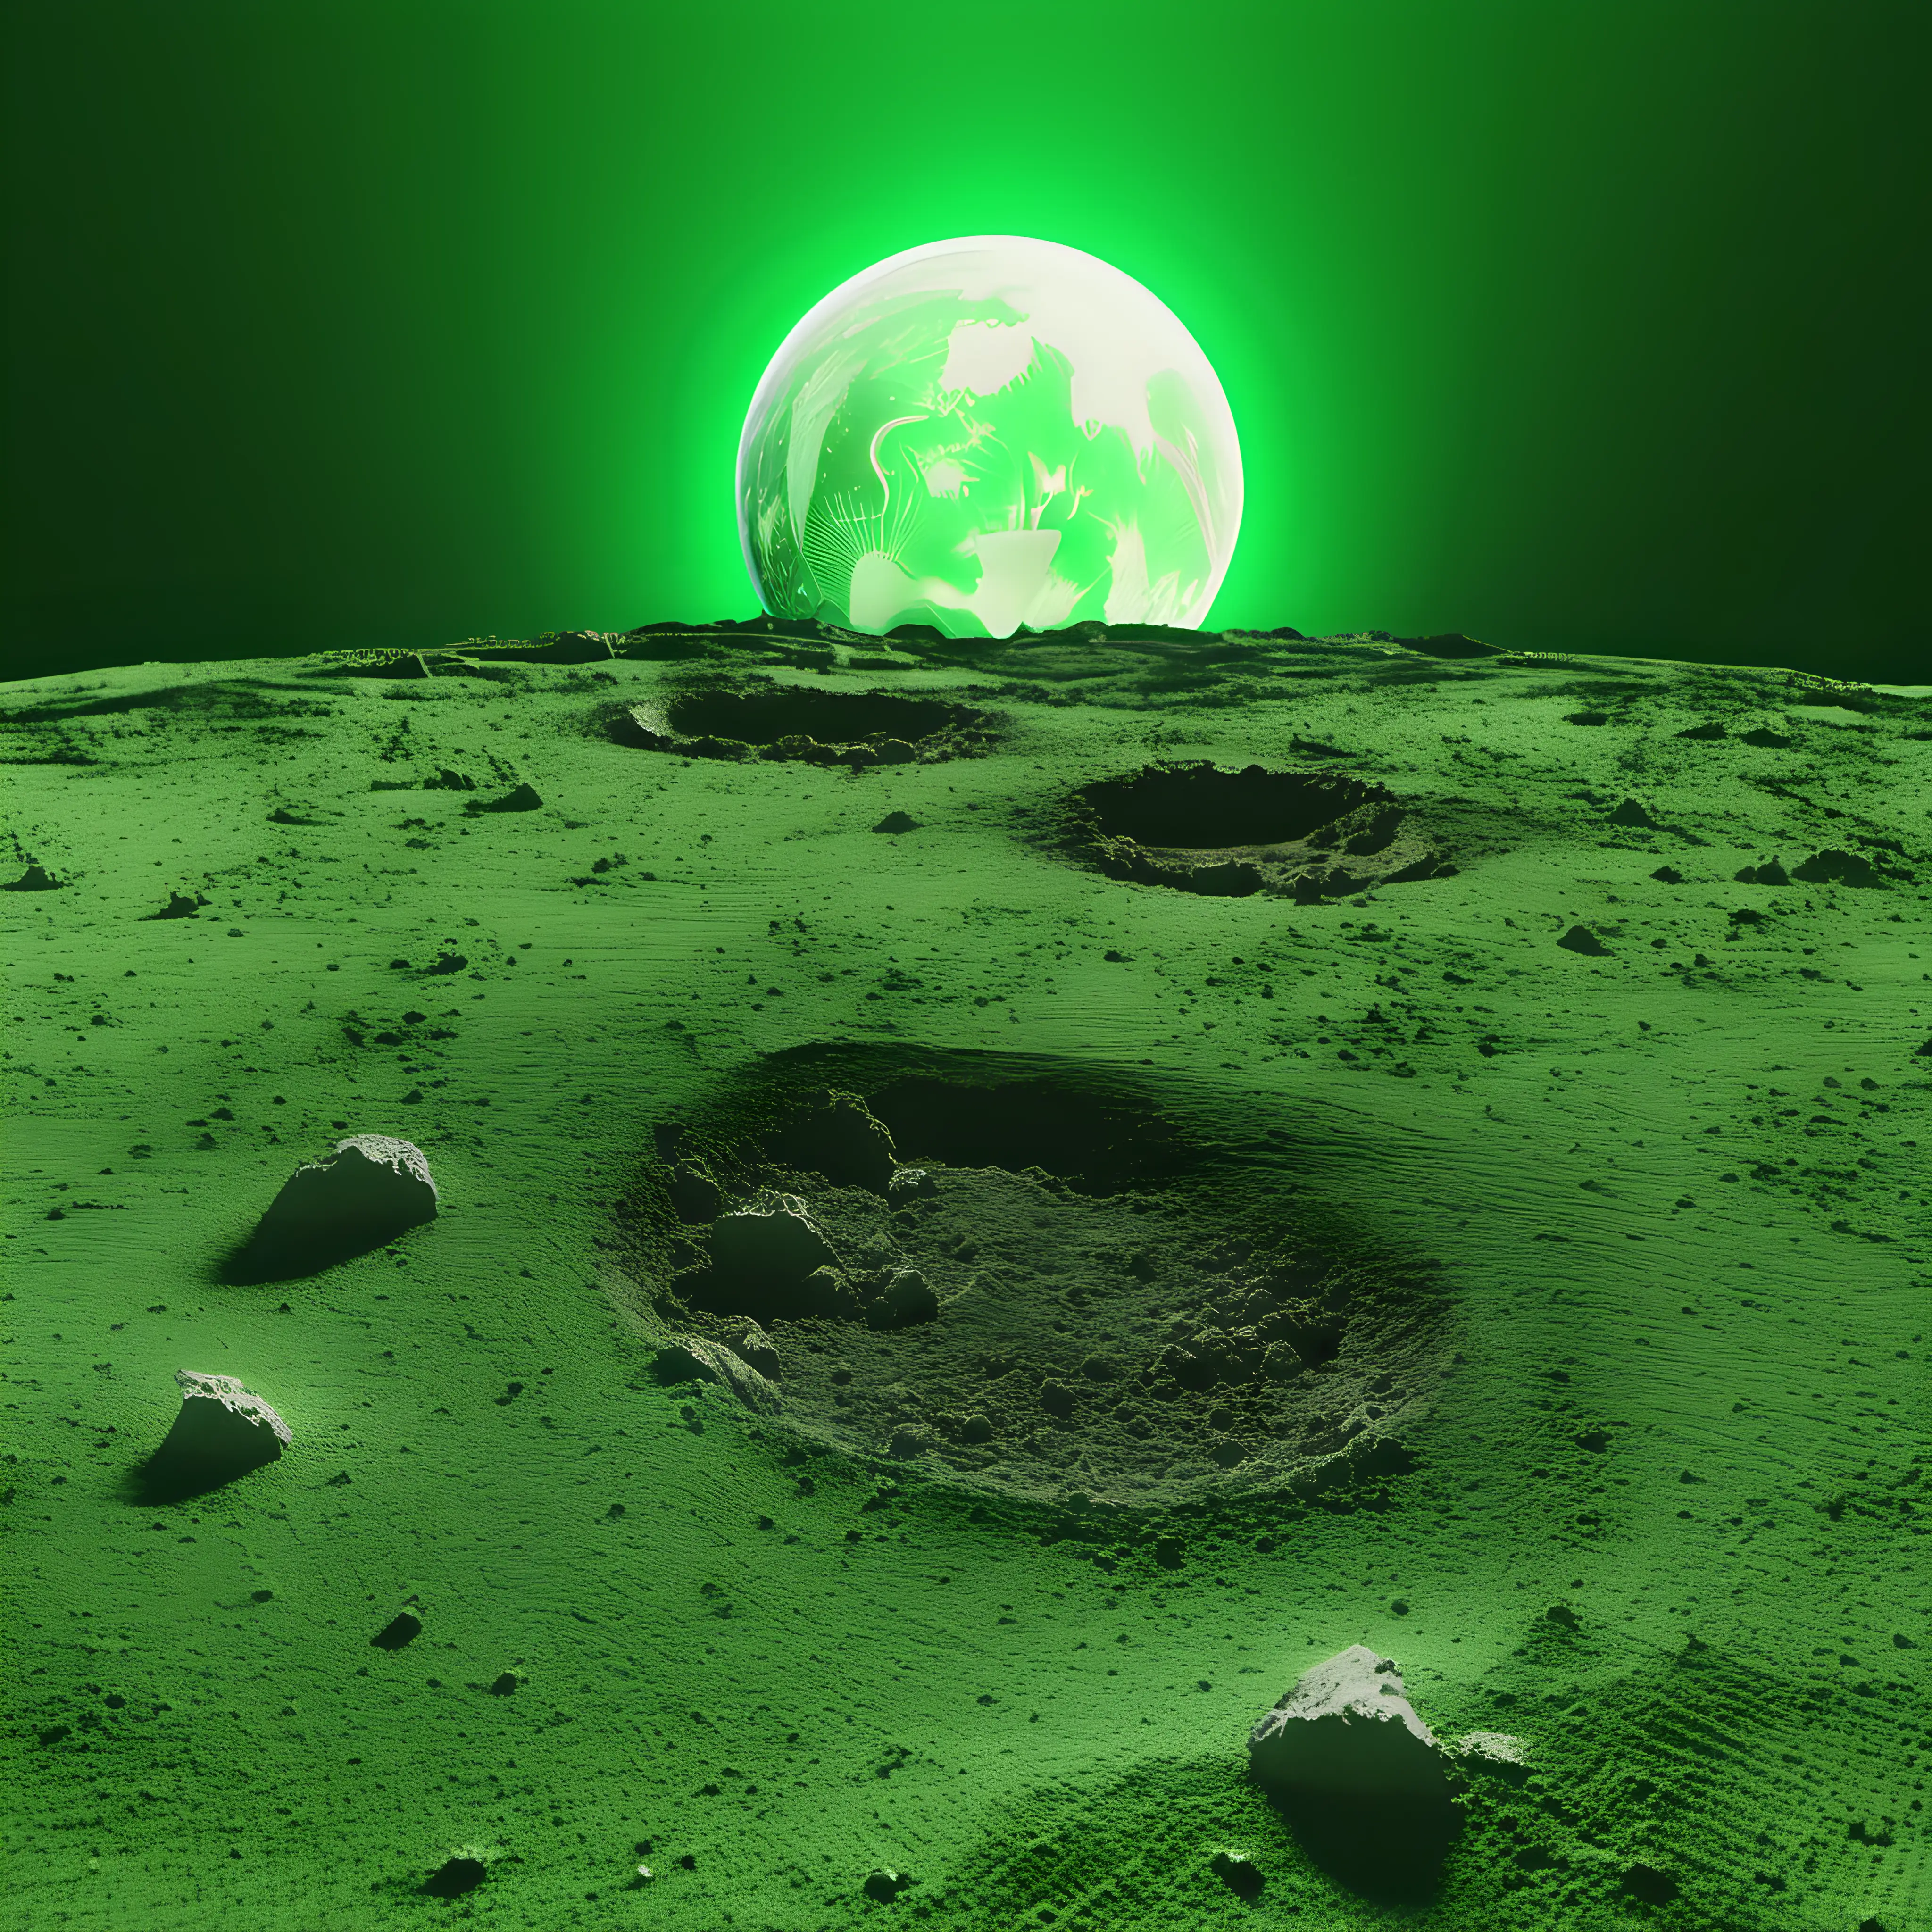 Lunar Landscape with Earth in the Background for Green Screen